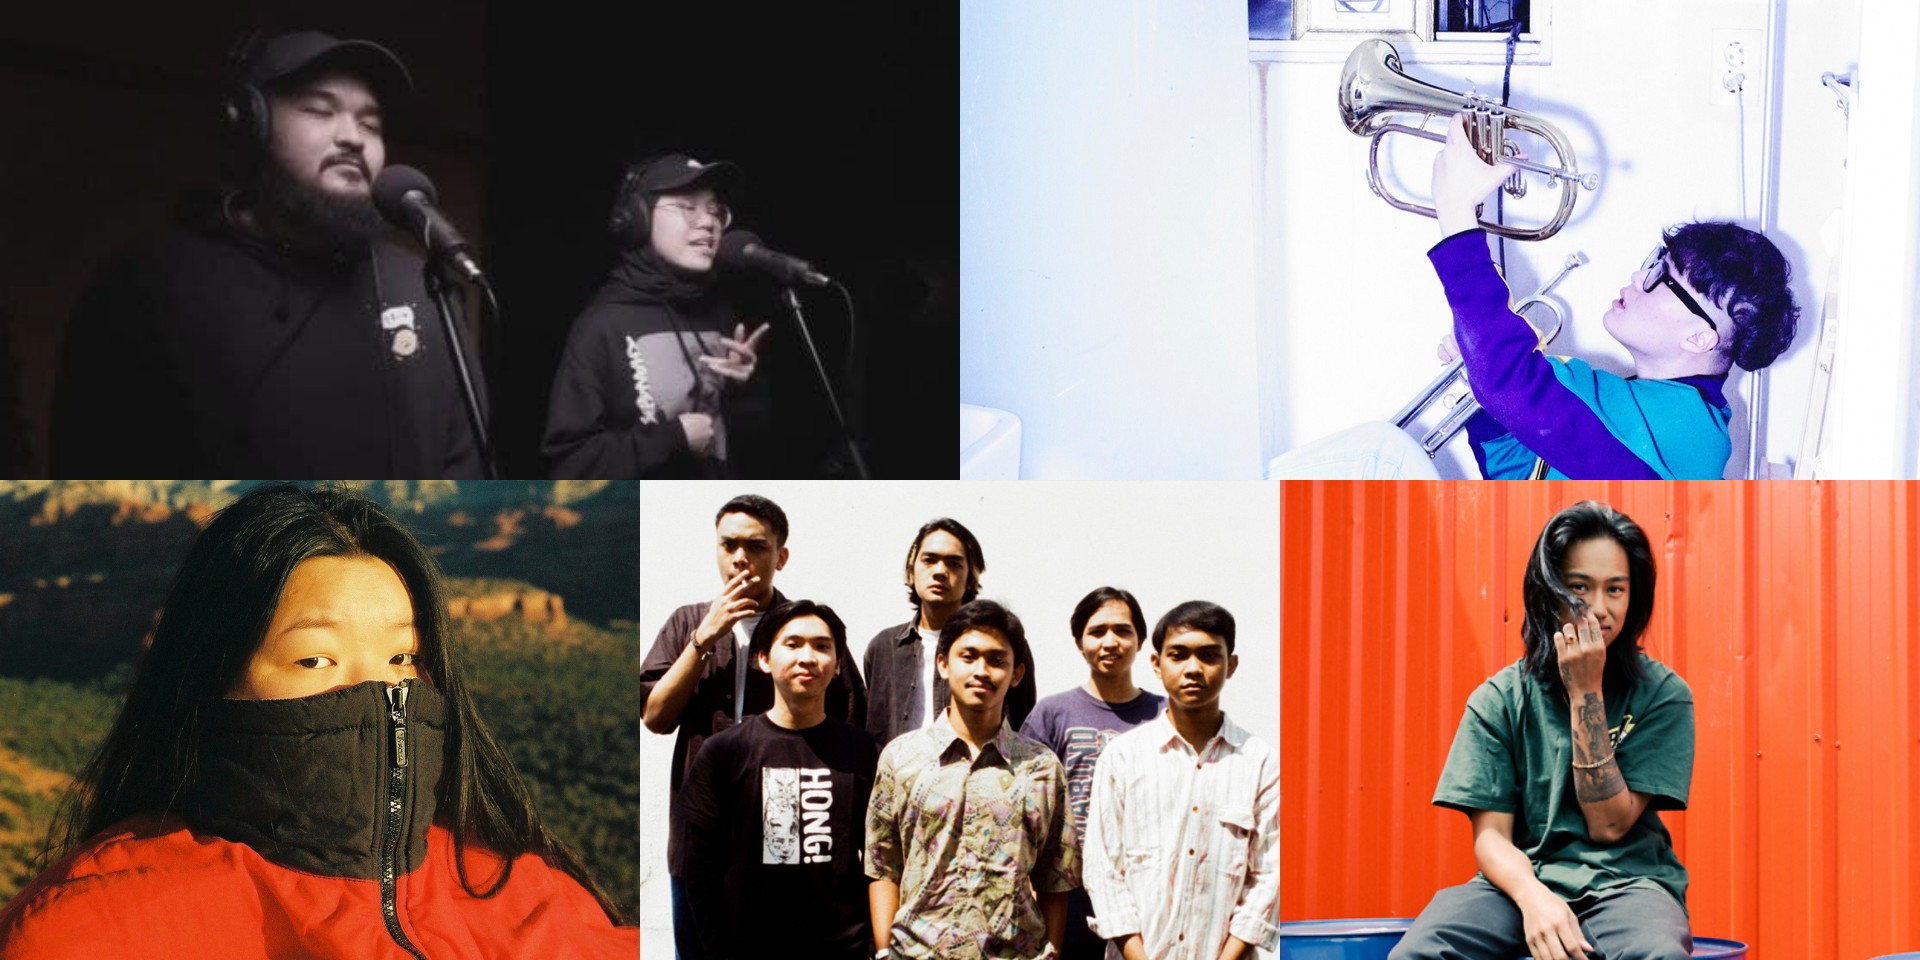 Vans Musicians Wanted 2021 Asia-Pacific top 5 finalists: Q The Trumpet, Nathanie, Squid the Kid, Kinder Bloomen, and Yishun Panik